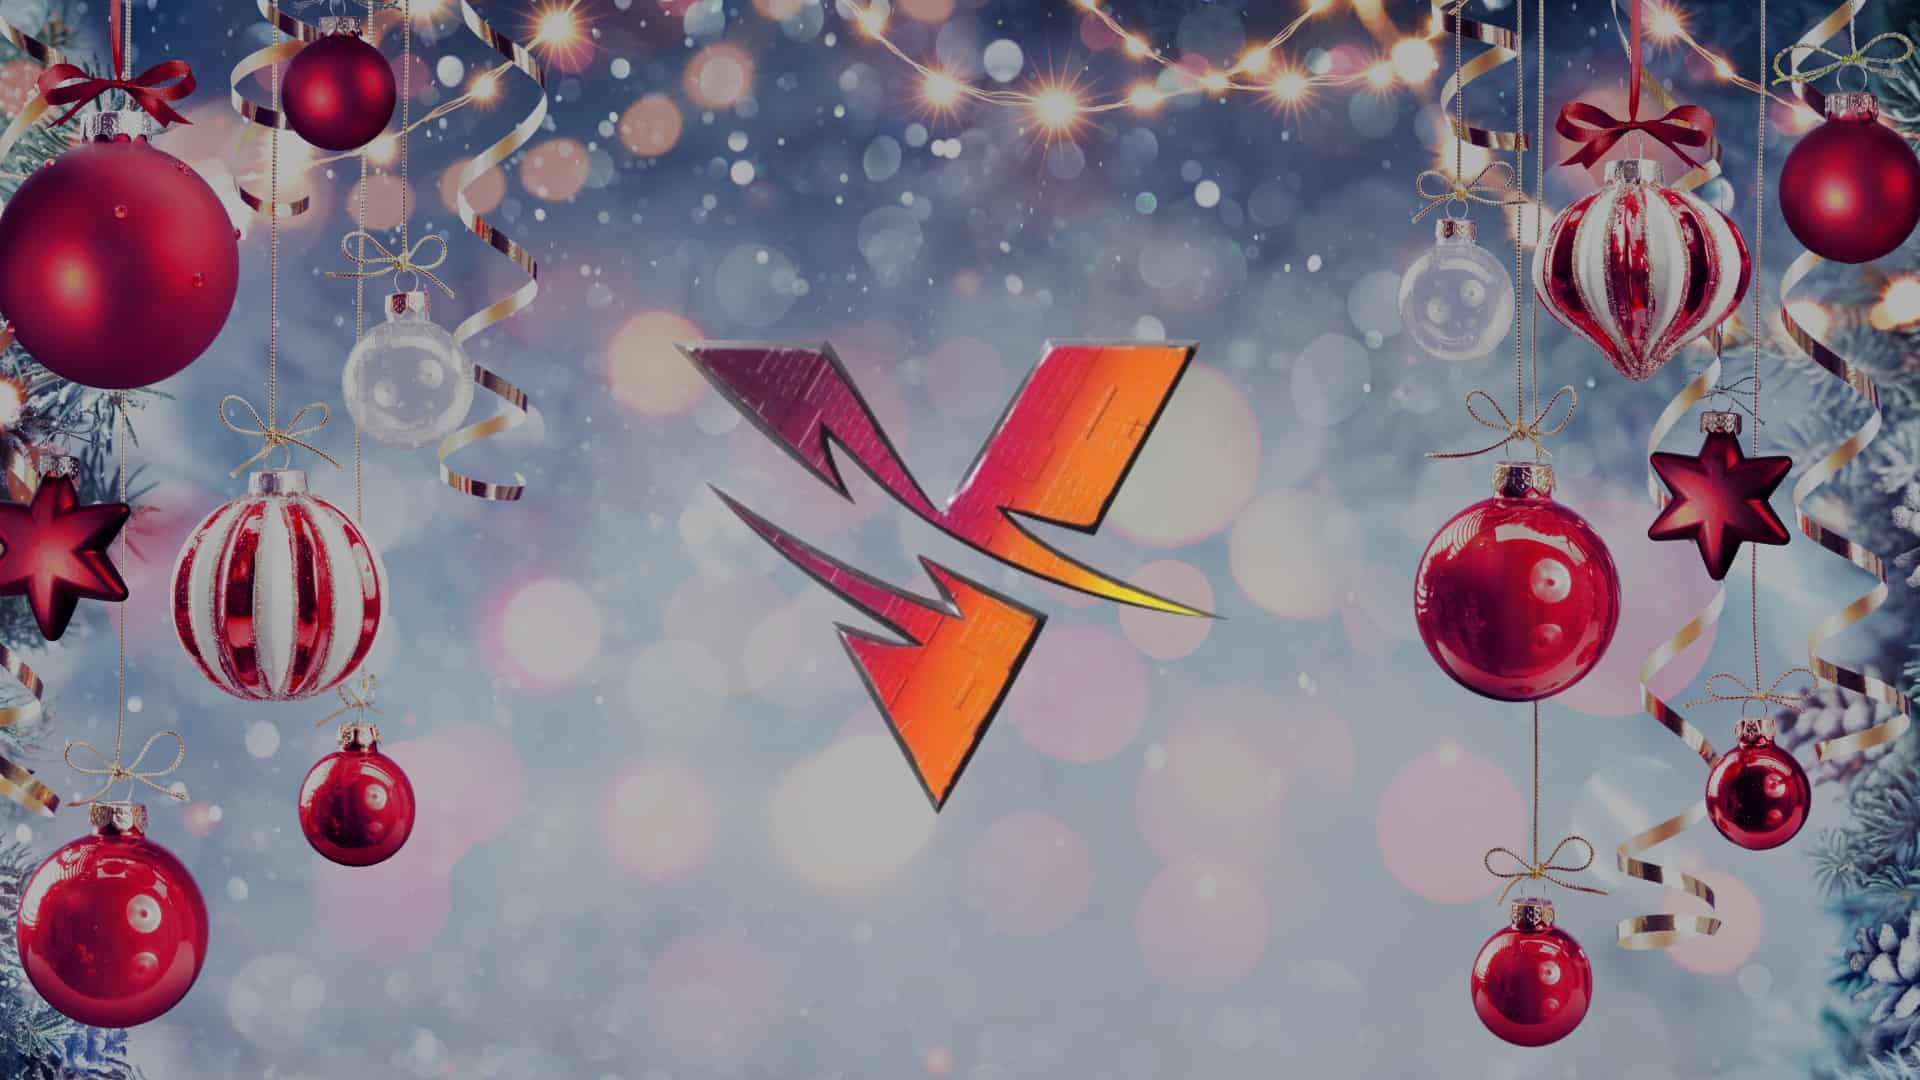 Vulcan Forged 12 Quests of Christmas Event - Play to Earn